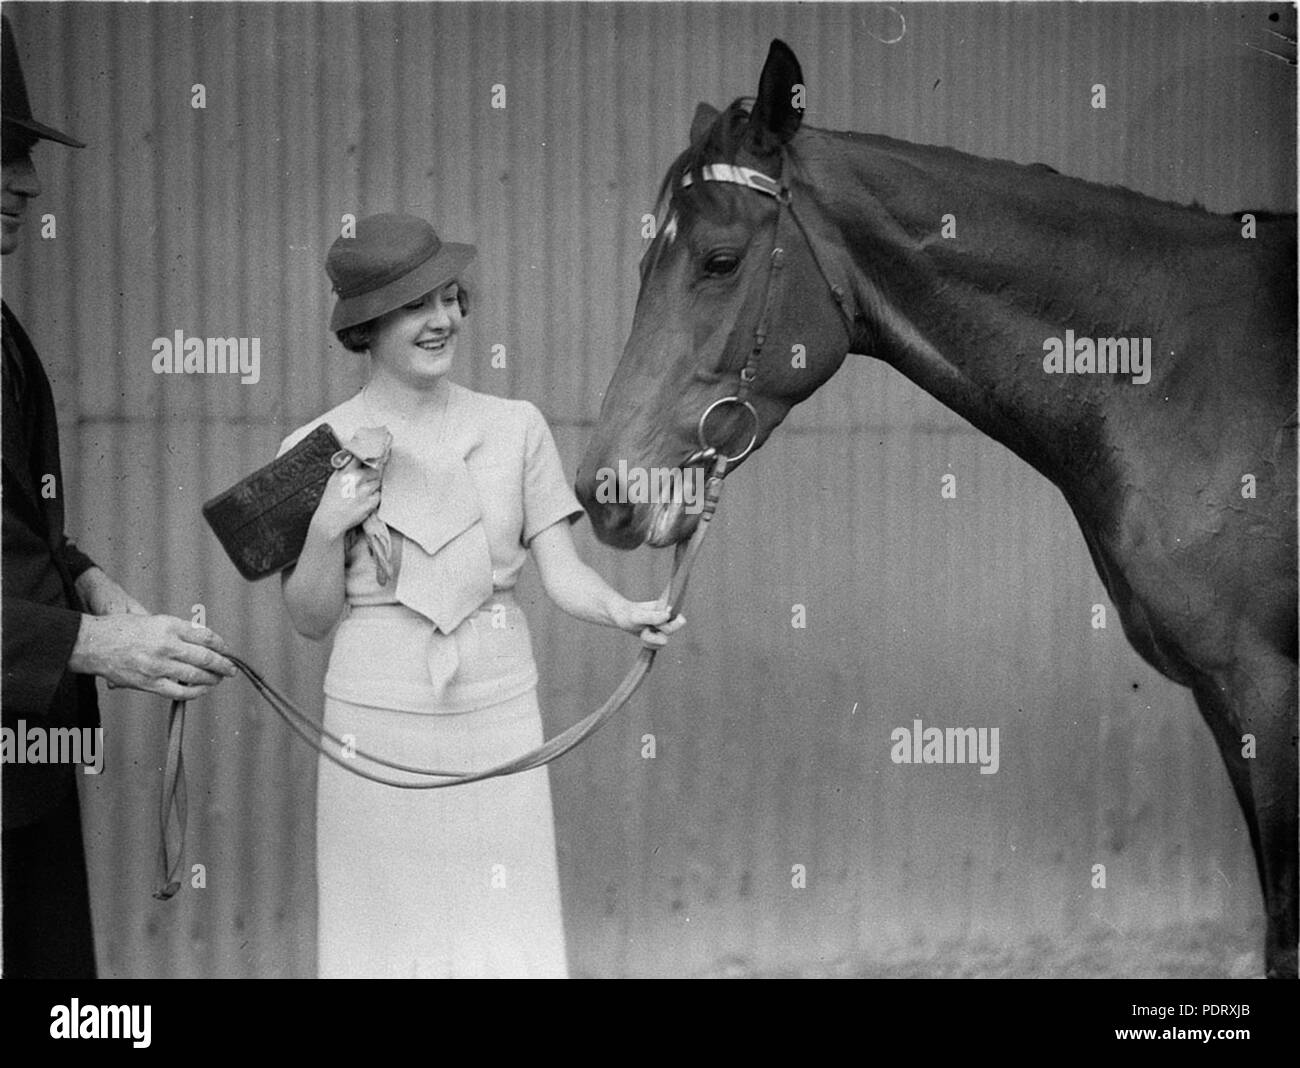 171 SLNSW 7230 A woman owner with her winning horse Stock Photo